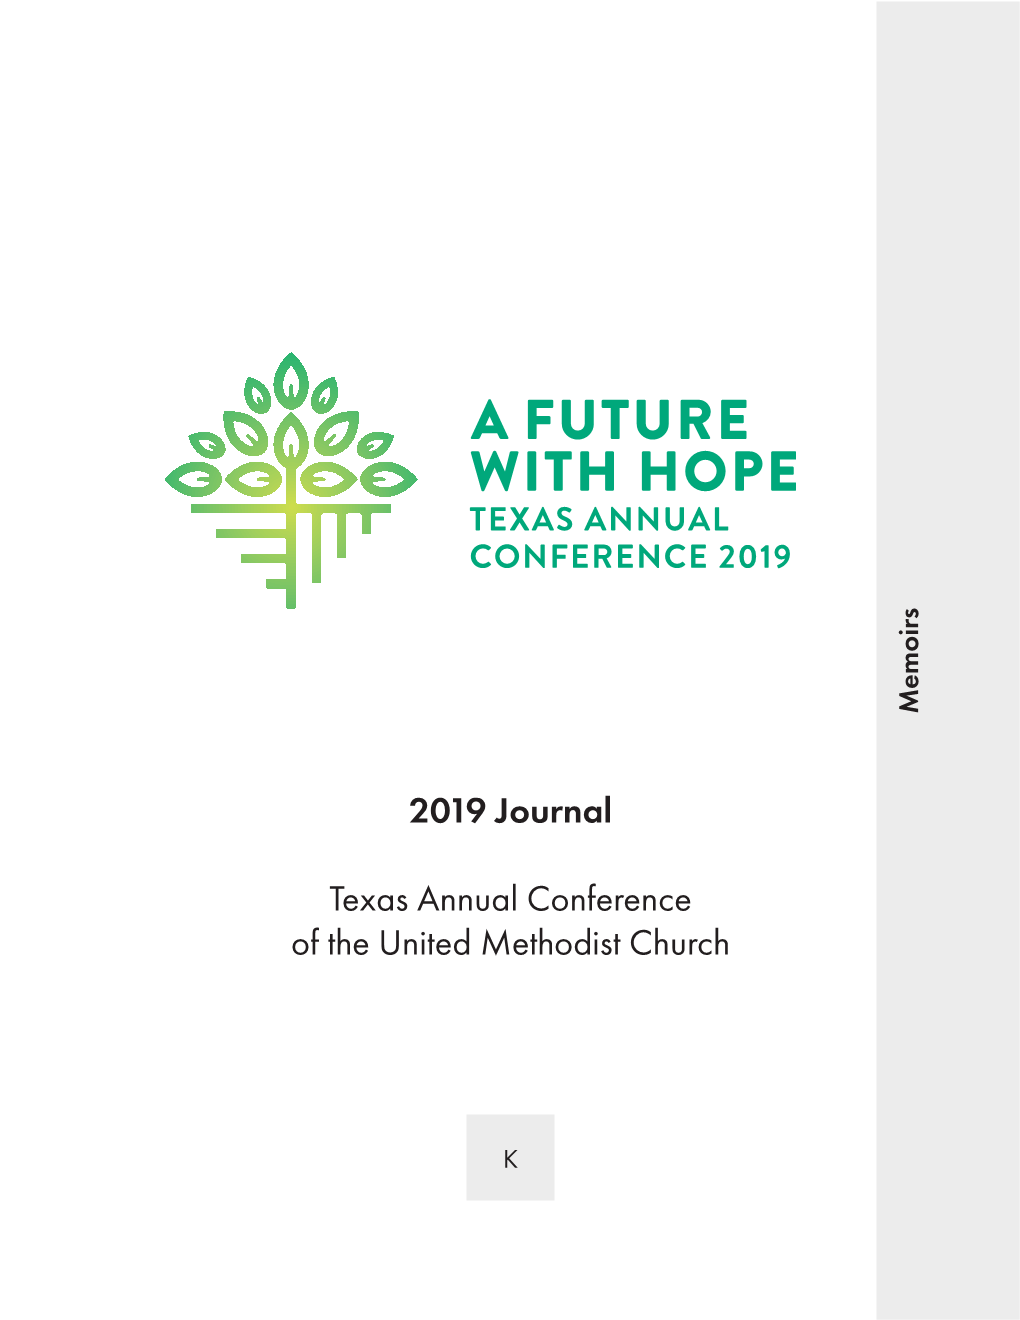 2019 Journal Texas Annual Conference of the United Methodist